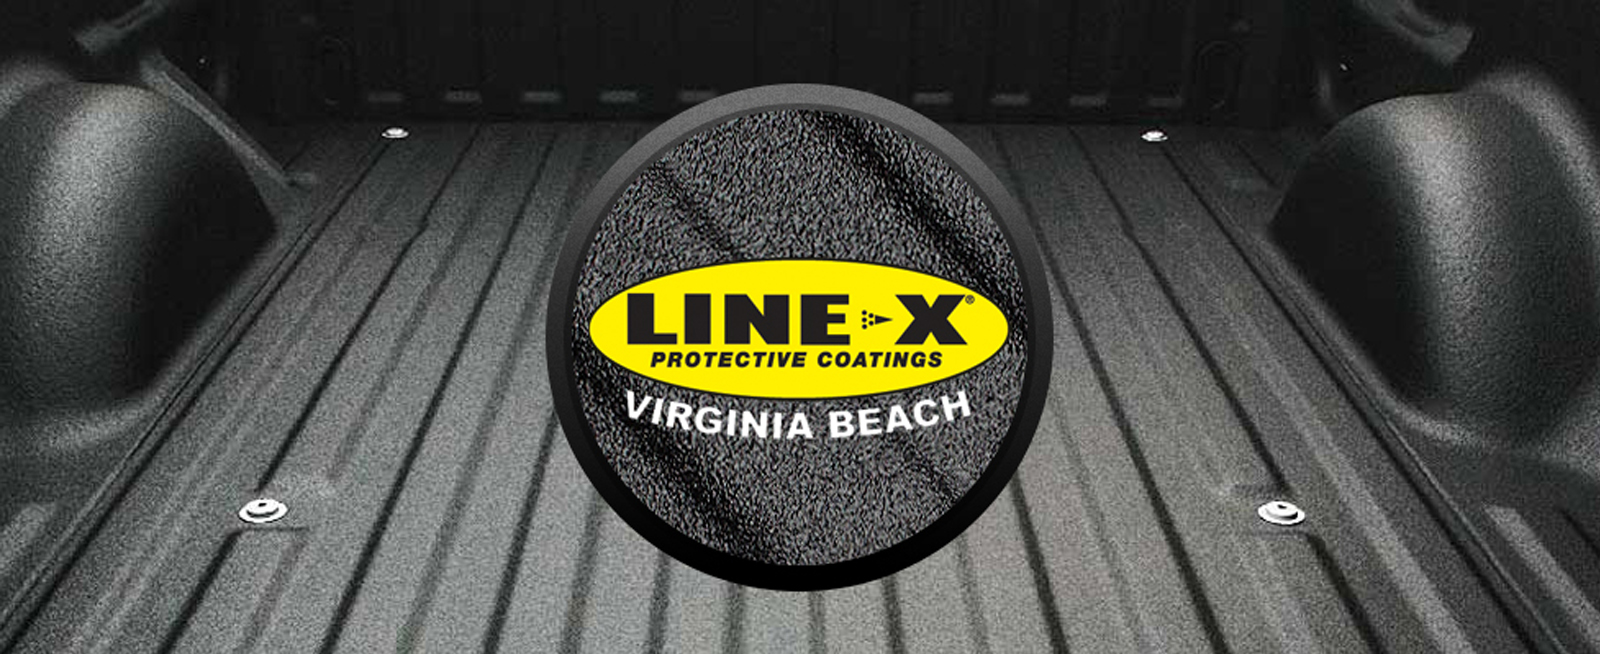 Bedliners Line X Products Line X Of Virginia Beach Protective Coatings Truck Bedliners And Accessories